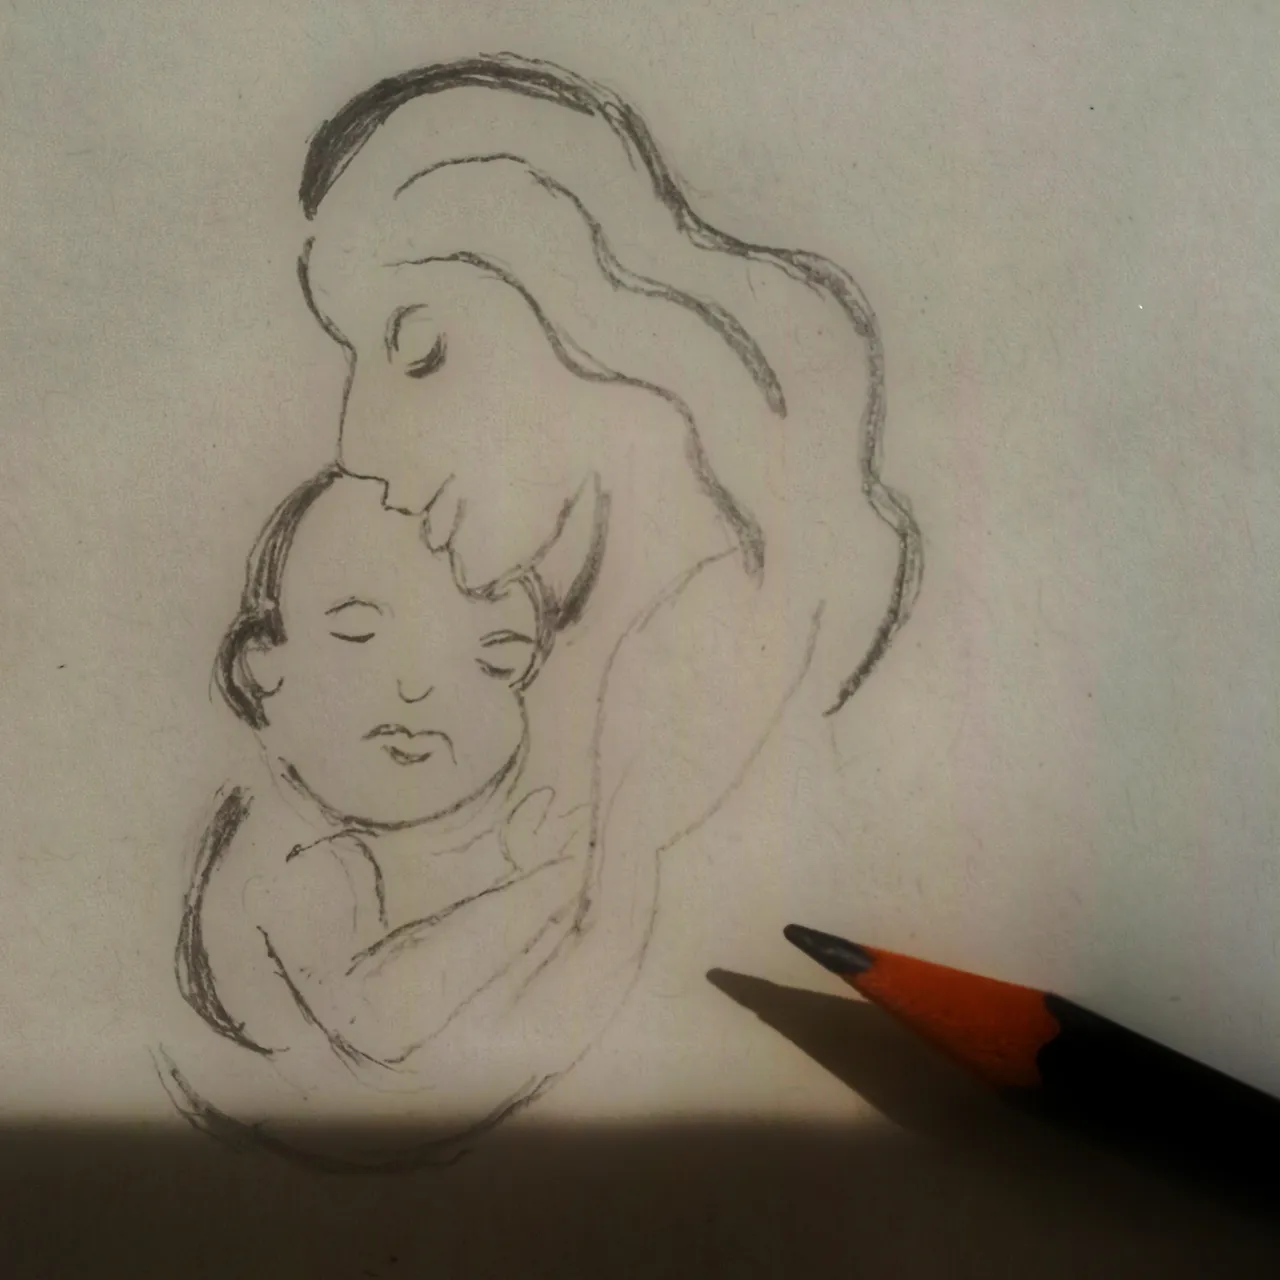 I Recenly Purchased A Pencil Sketch Of A Nursing Woman With Child And What  ... | Pablo Picasso Club